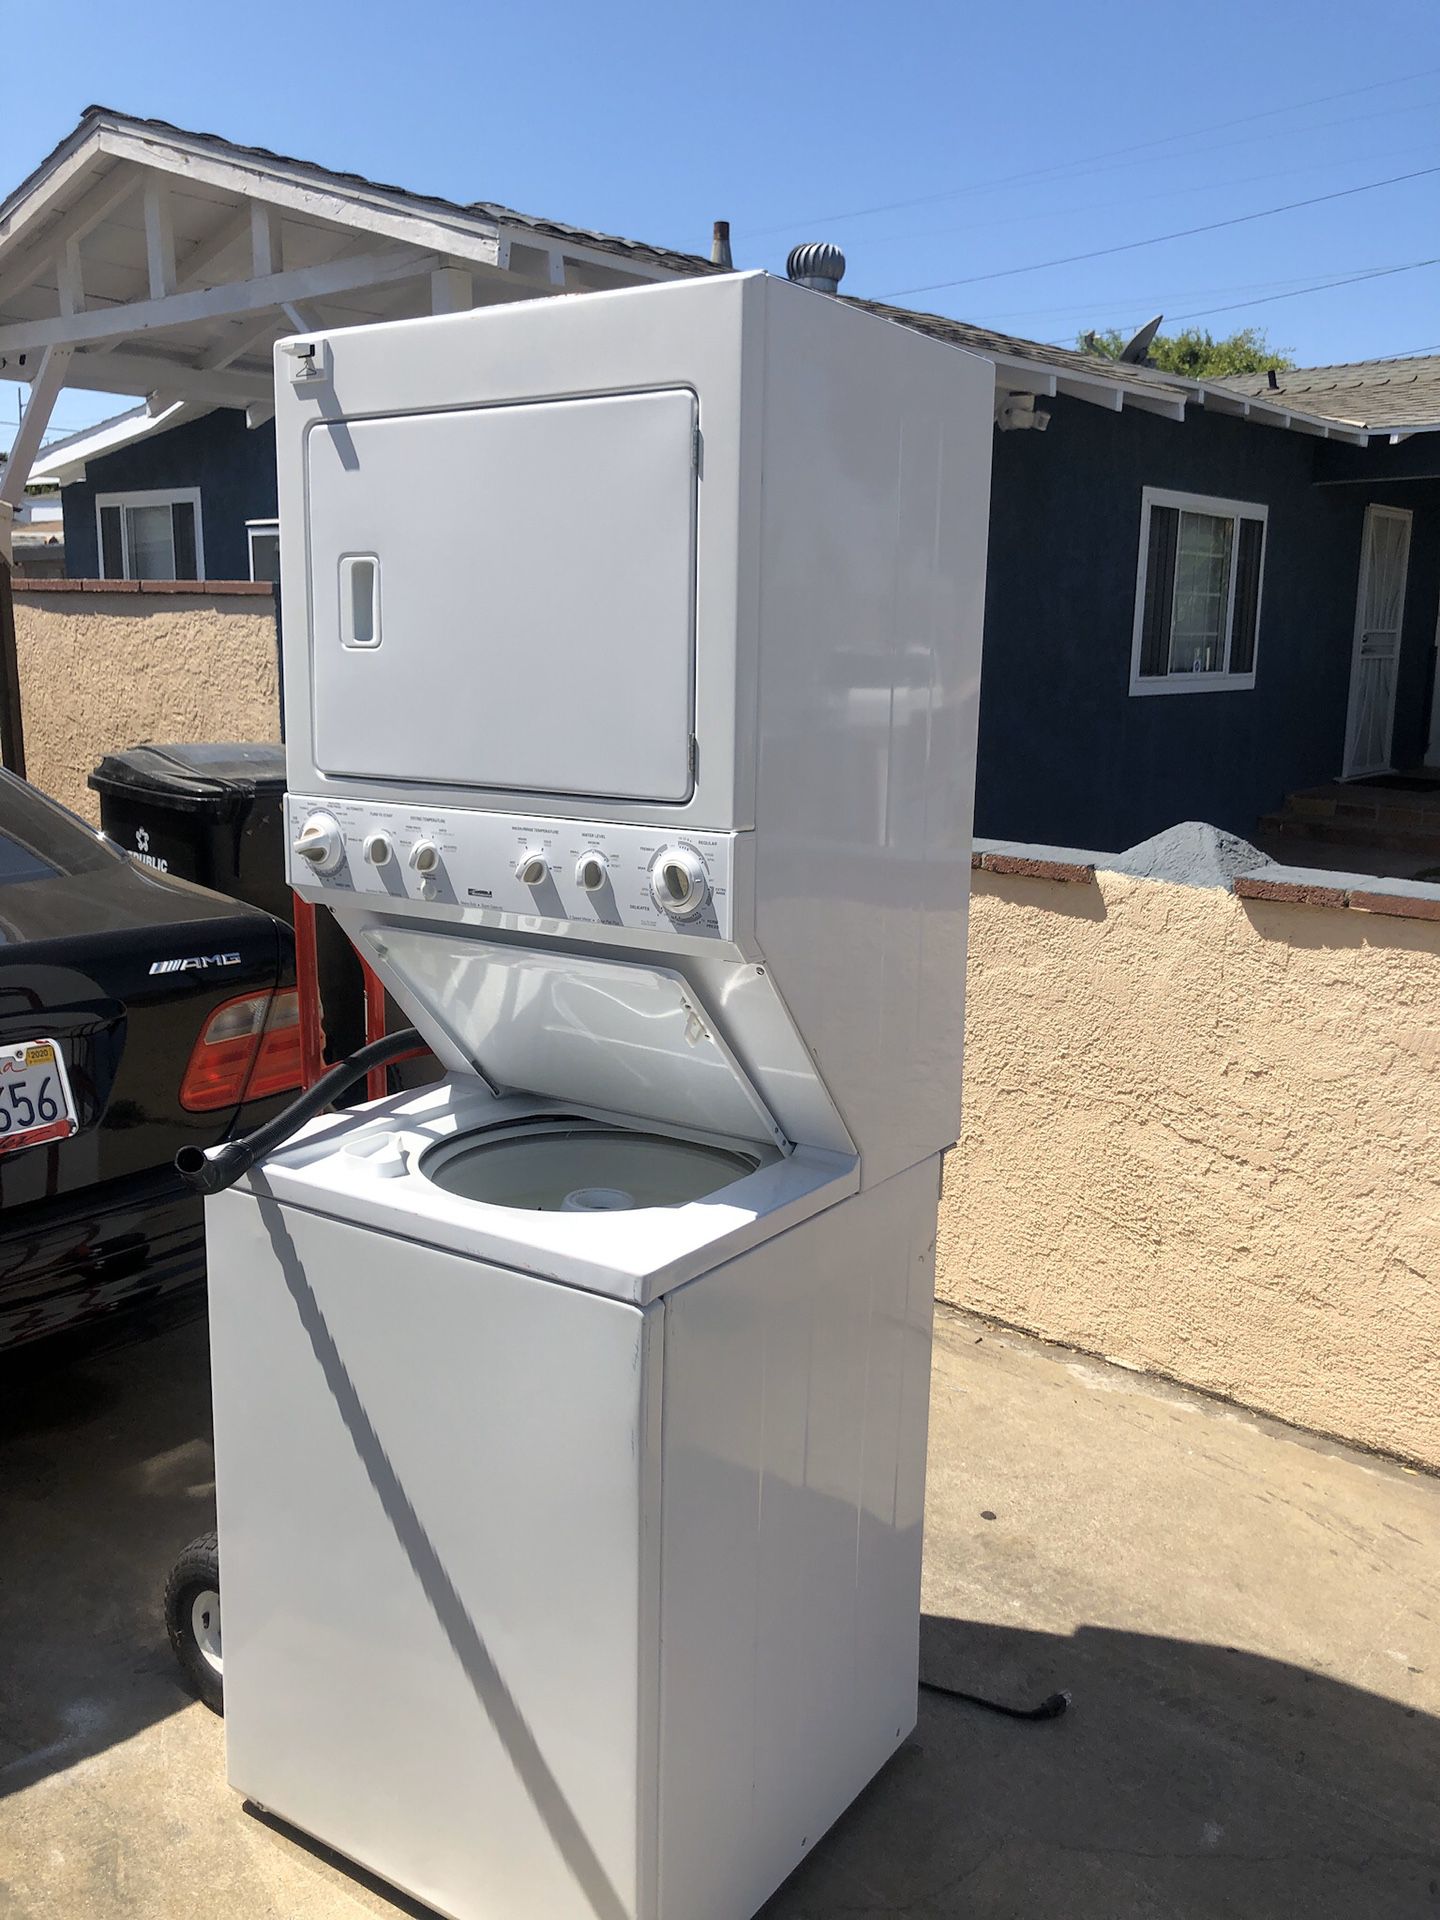 Kennedy washer dryer stacked 27” full load